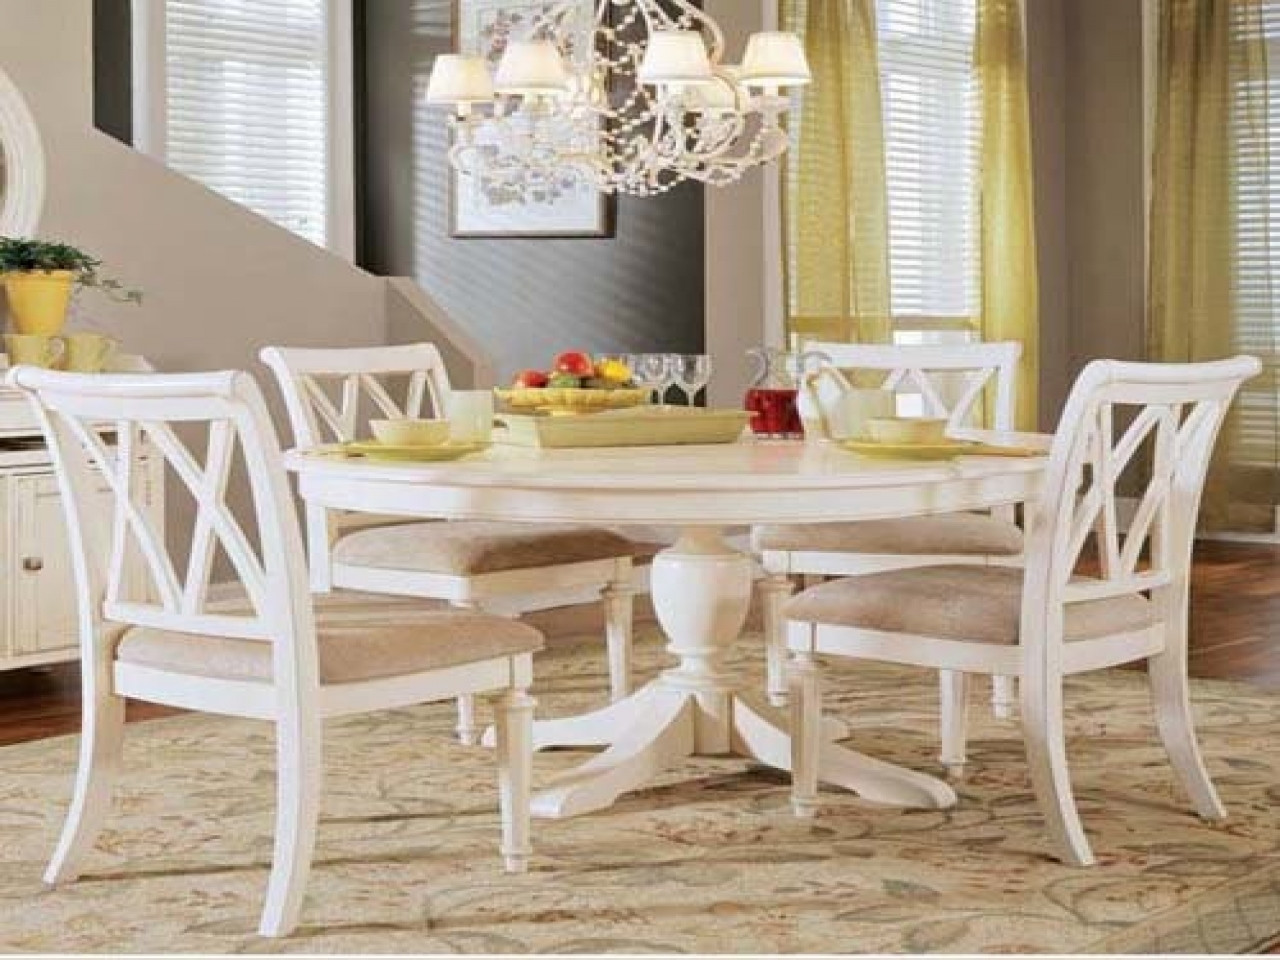 White Kitchen Table Sets
 Dining tables small kitchen table and chairs walmart